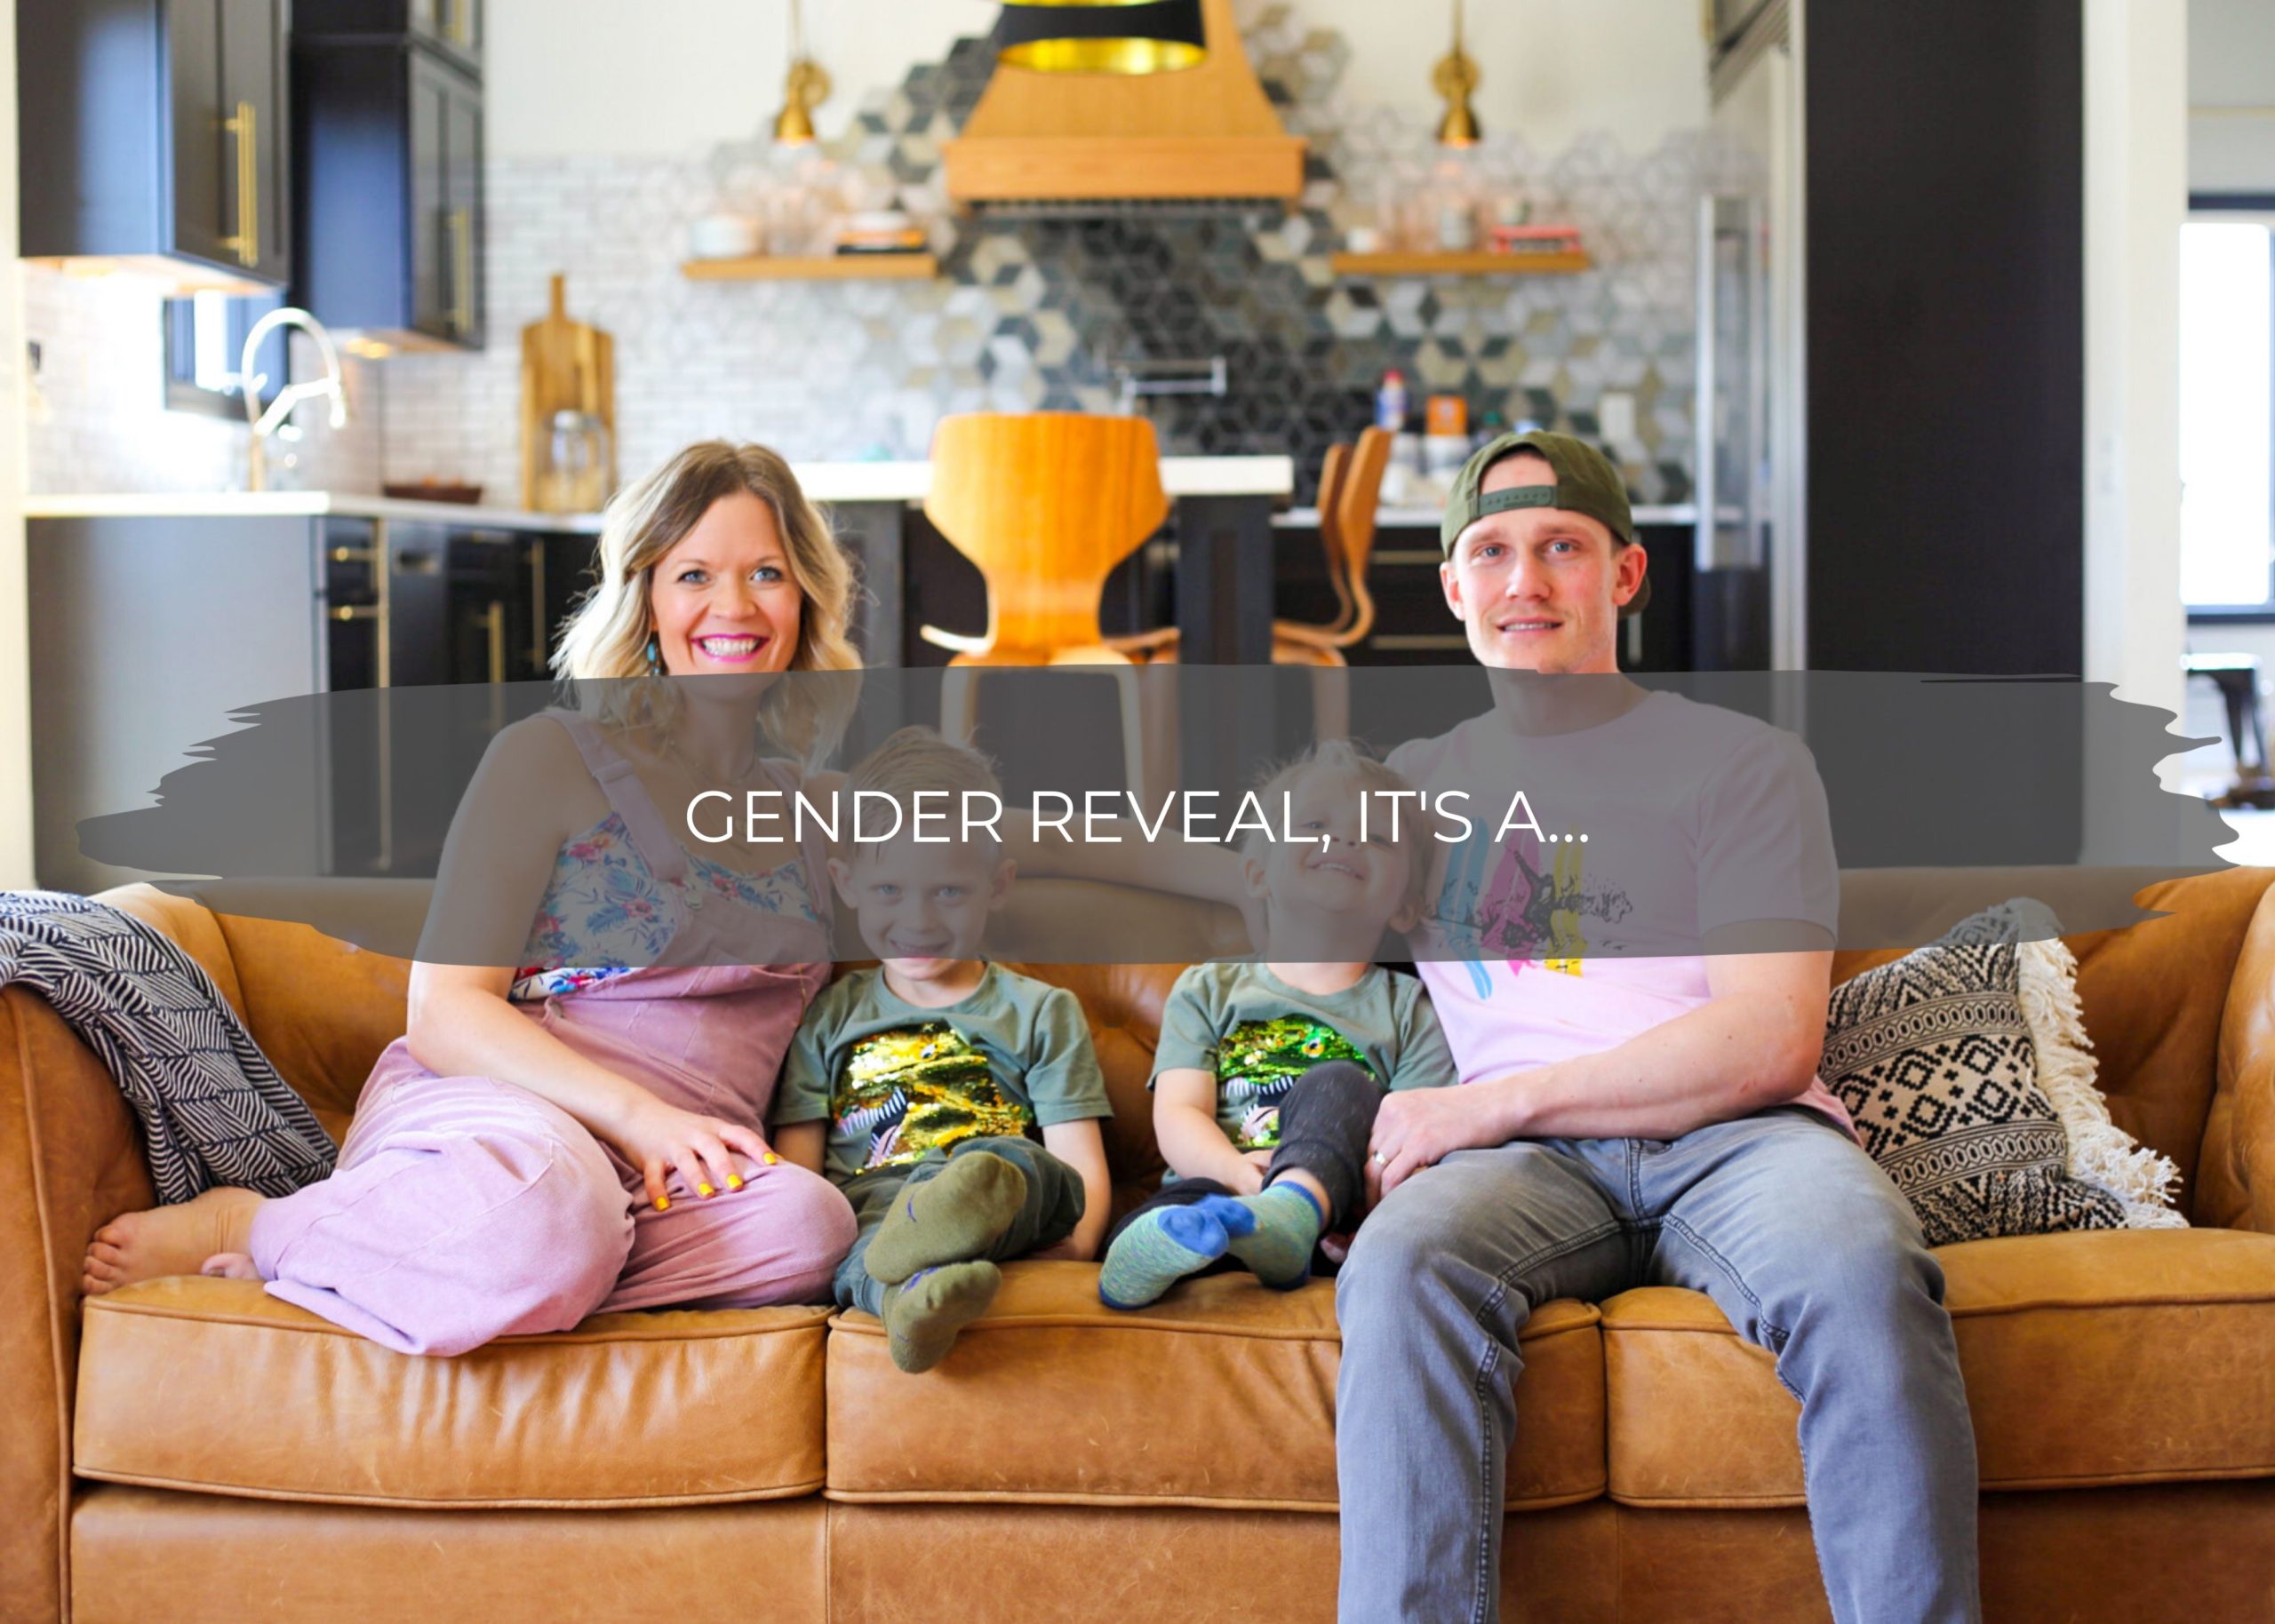 Gender Reveal, IT'S A... | construction2style